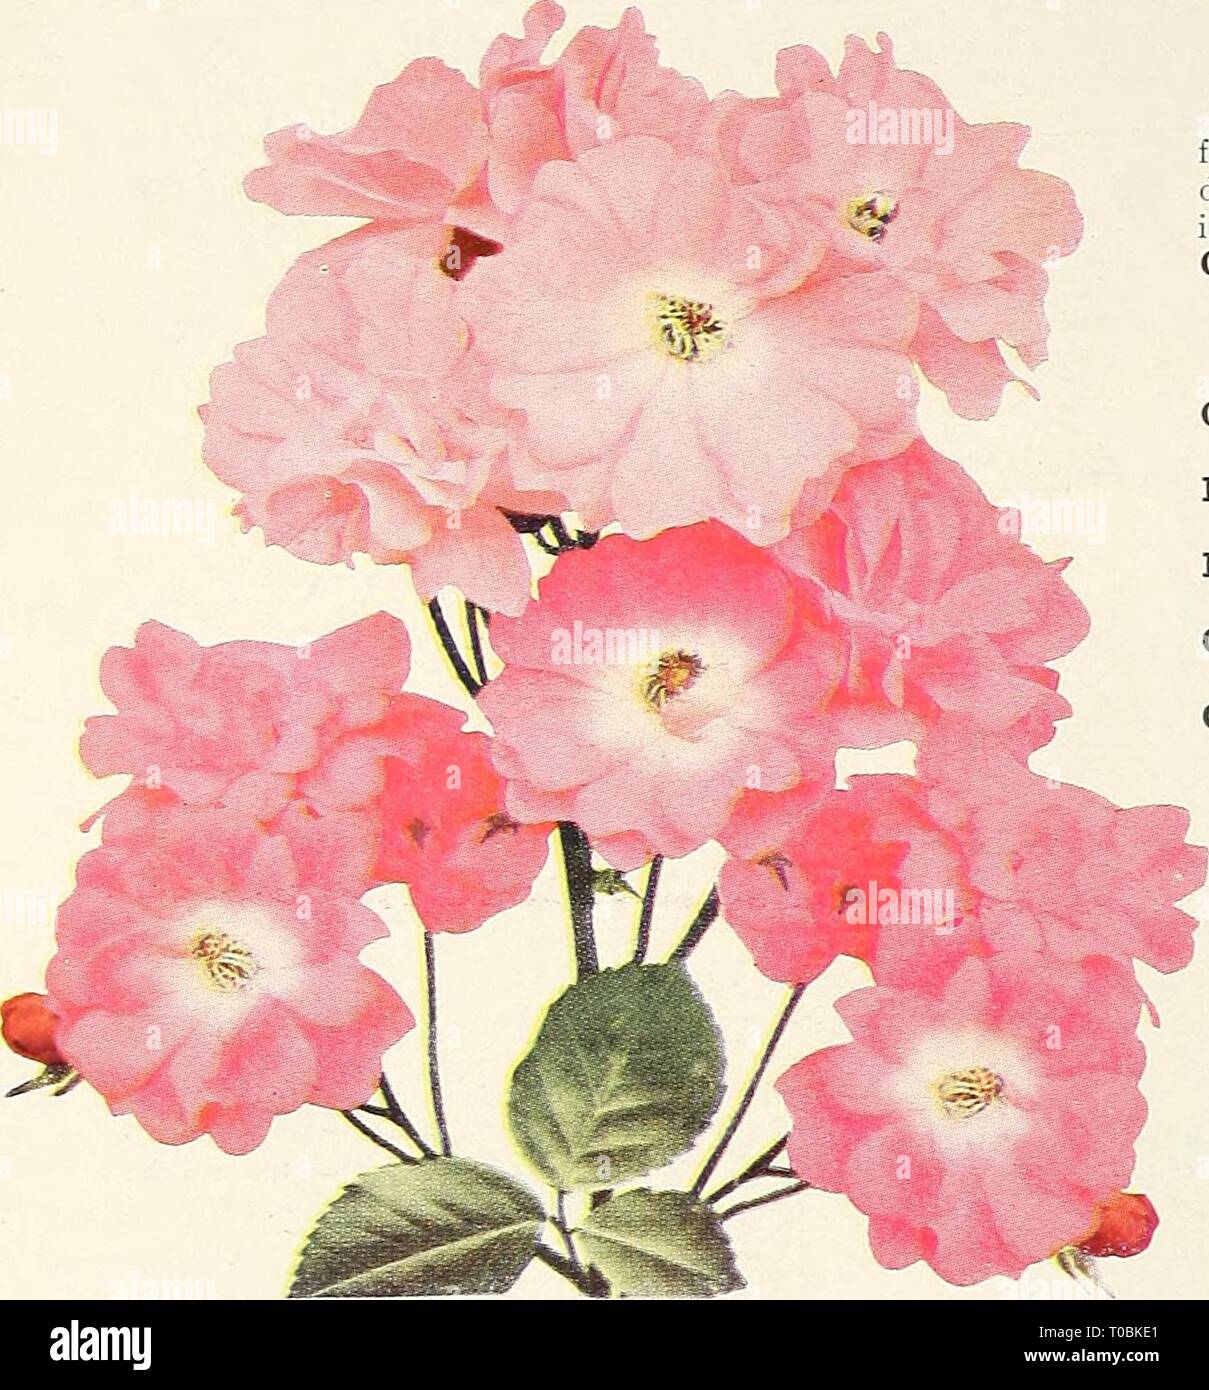 Dreer's garden book 1931 (1931) Dreer's garden book 1931 dreersgardenbook1931henr Year: 1931  136 /flEHRyA-l)REERj| SELECT-^vOSES &gt;HlMDEIiPM1k    Polyantha or Baby Roses A tj'pe of Rose which, is very popular for bedding purposes. They form shapely, compact bushy specimens about 18 inches high, pro- ducing in great profusion from early in the season until severe frost immense trusses of small flowers. Cecile Brunner {The Fairy, or Sweetheart Rose). A variety with dainty double little flowers of perfect form produced in many flowered graceful sprays; color a soft ros3'-pink dn a rich cream Stock Photo